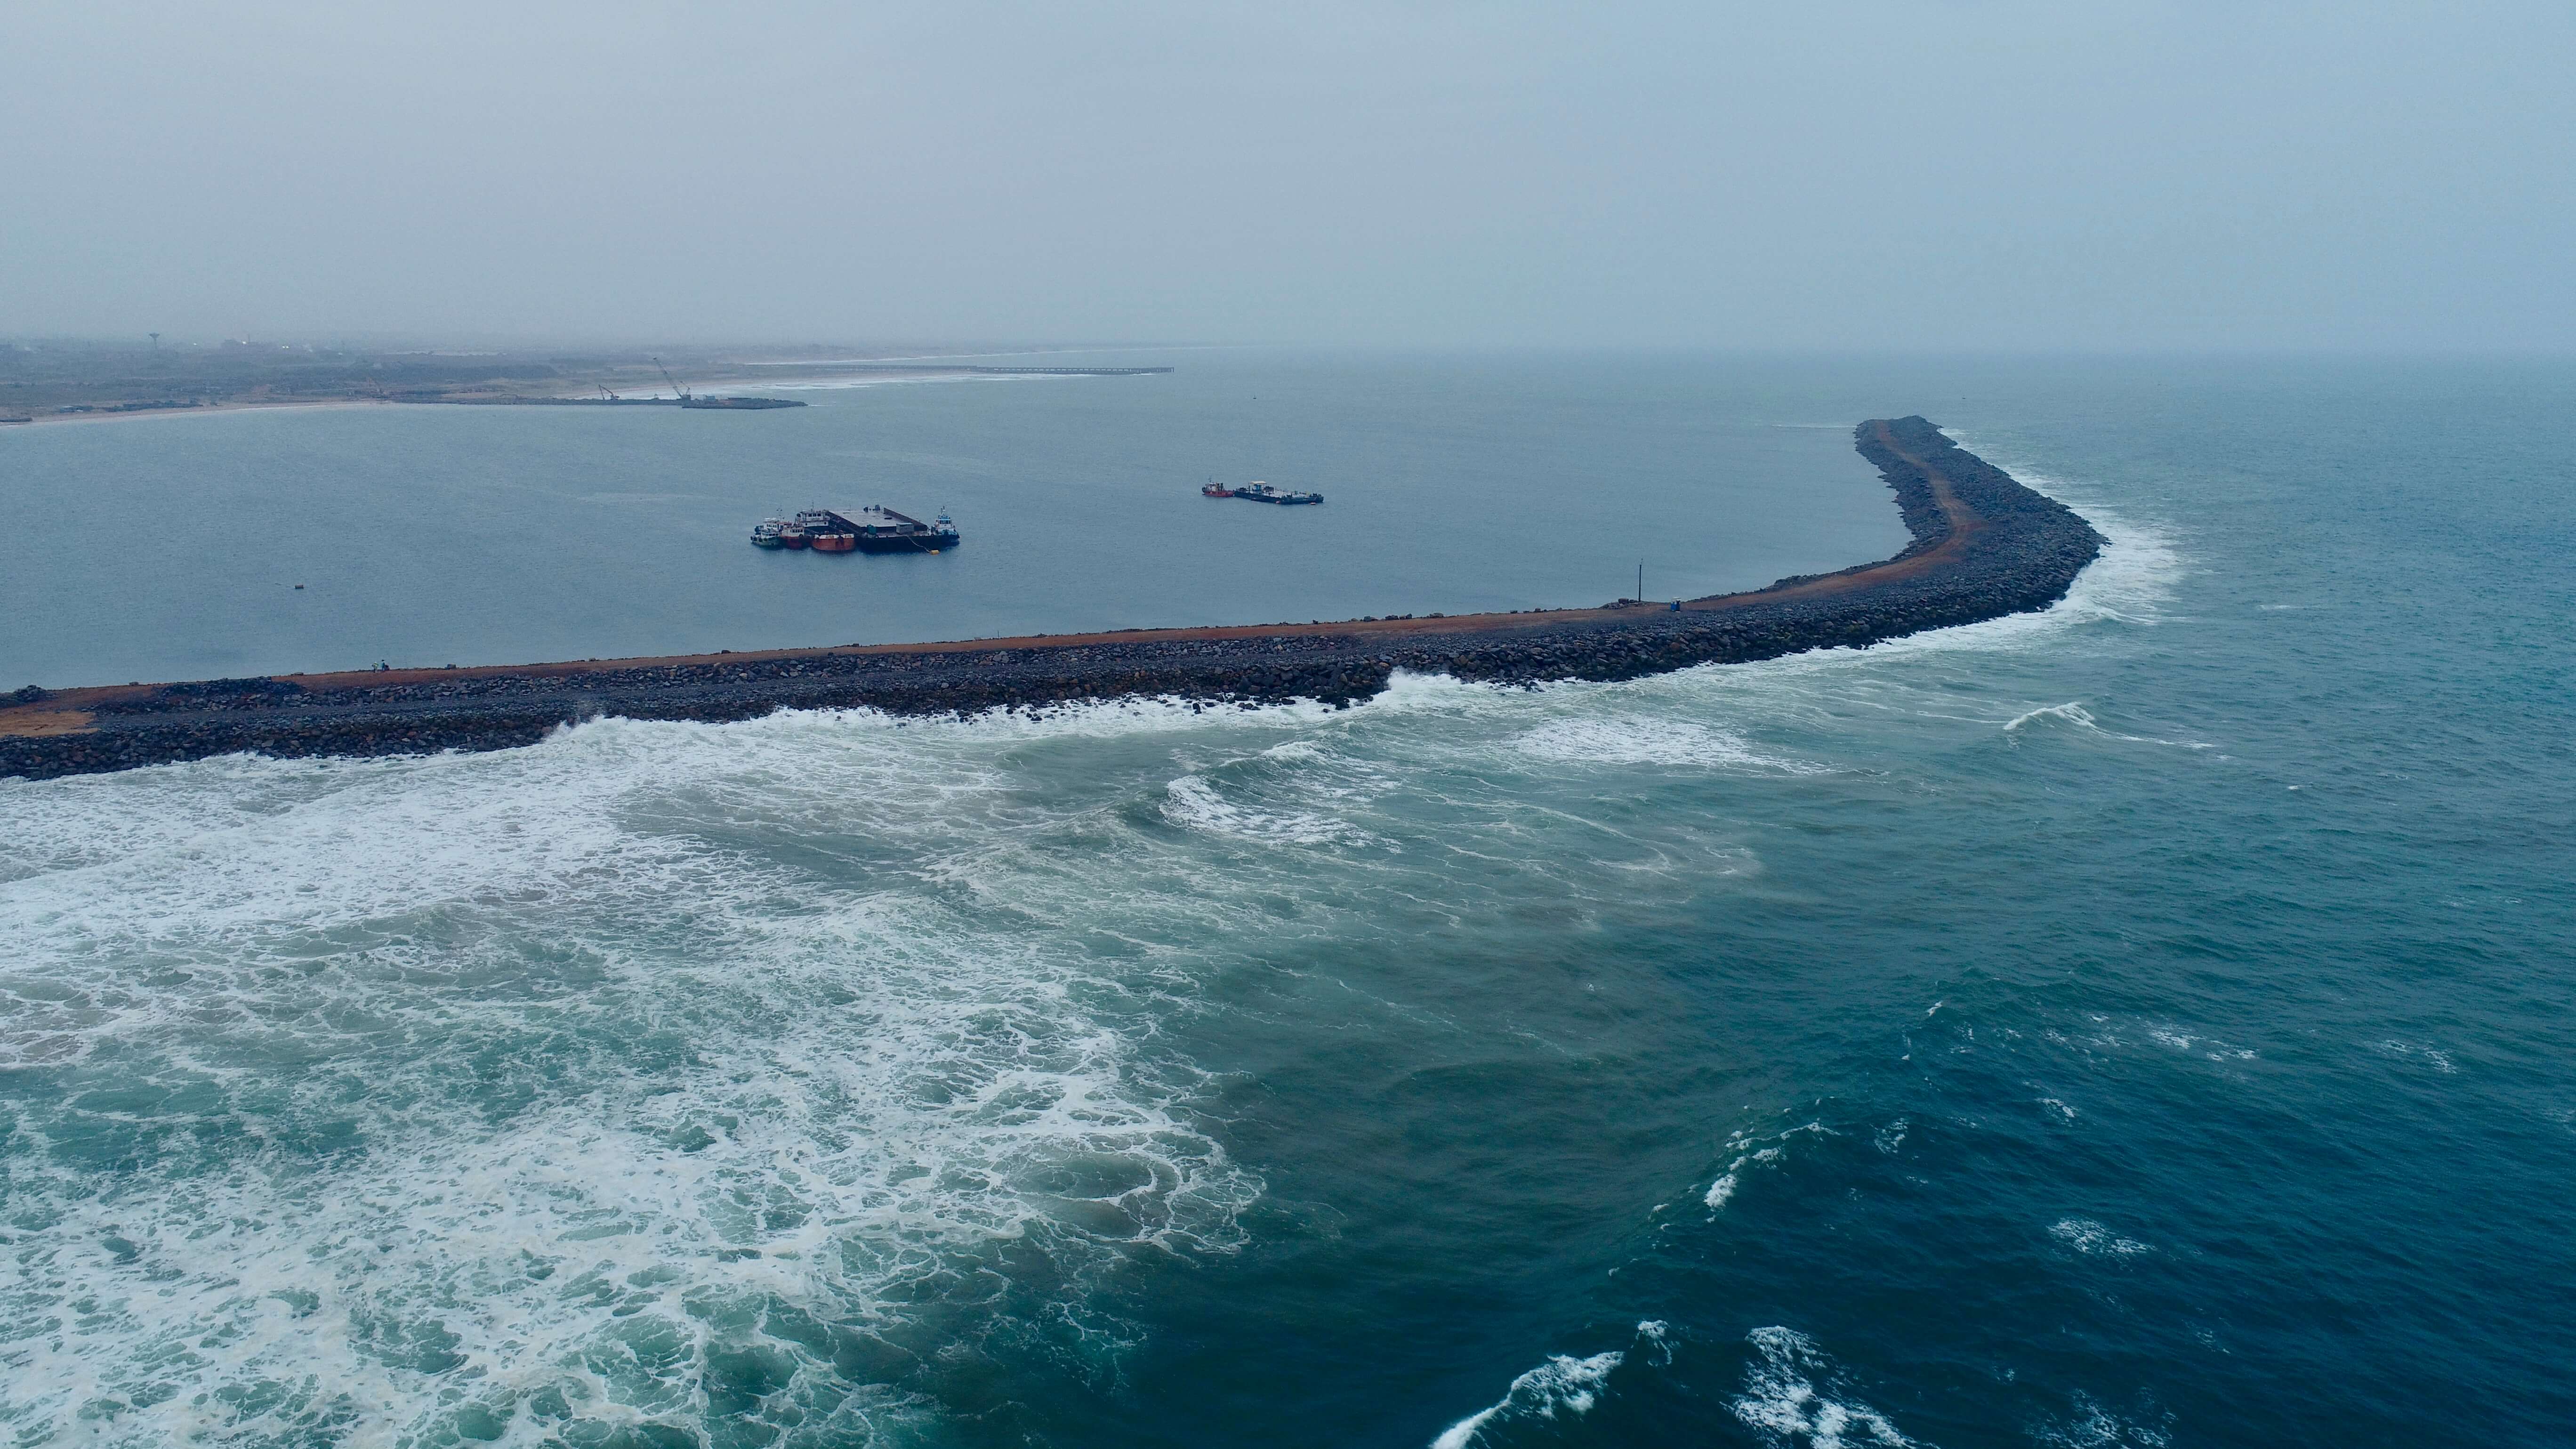 The existing South breakwater extends 1.76km into the Bay of Bengal